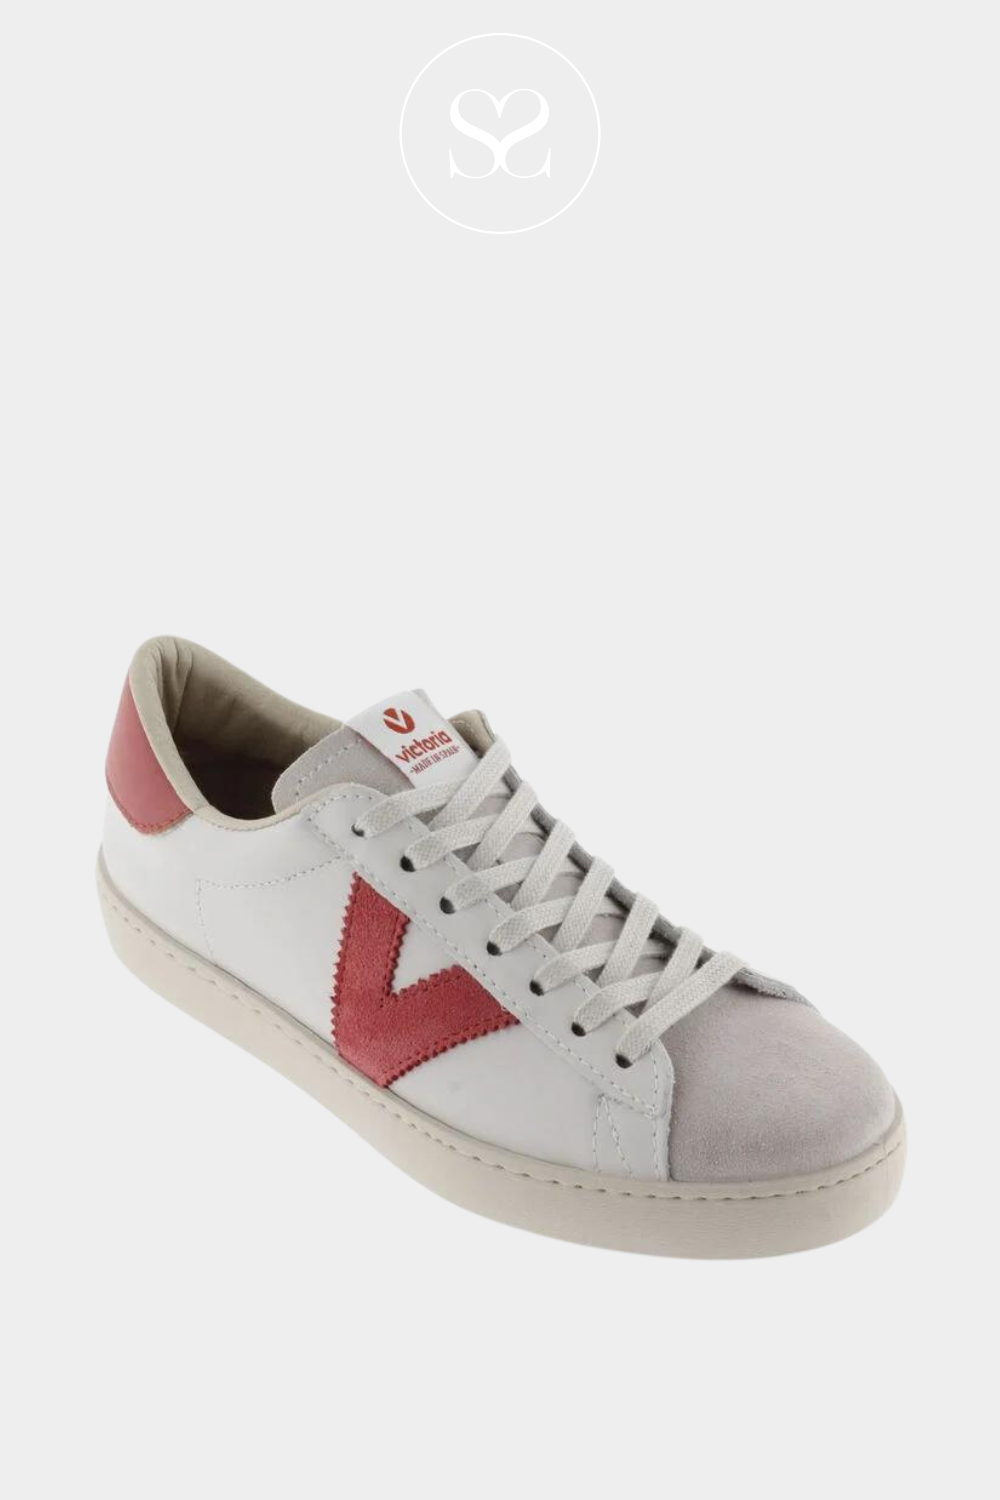 VICTORIA 1-126142 WHITE RASPBERRY TRAINERS WITH V LOGO, LACES AND SUEDE TOE